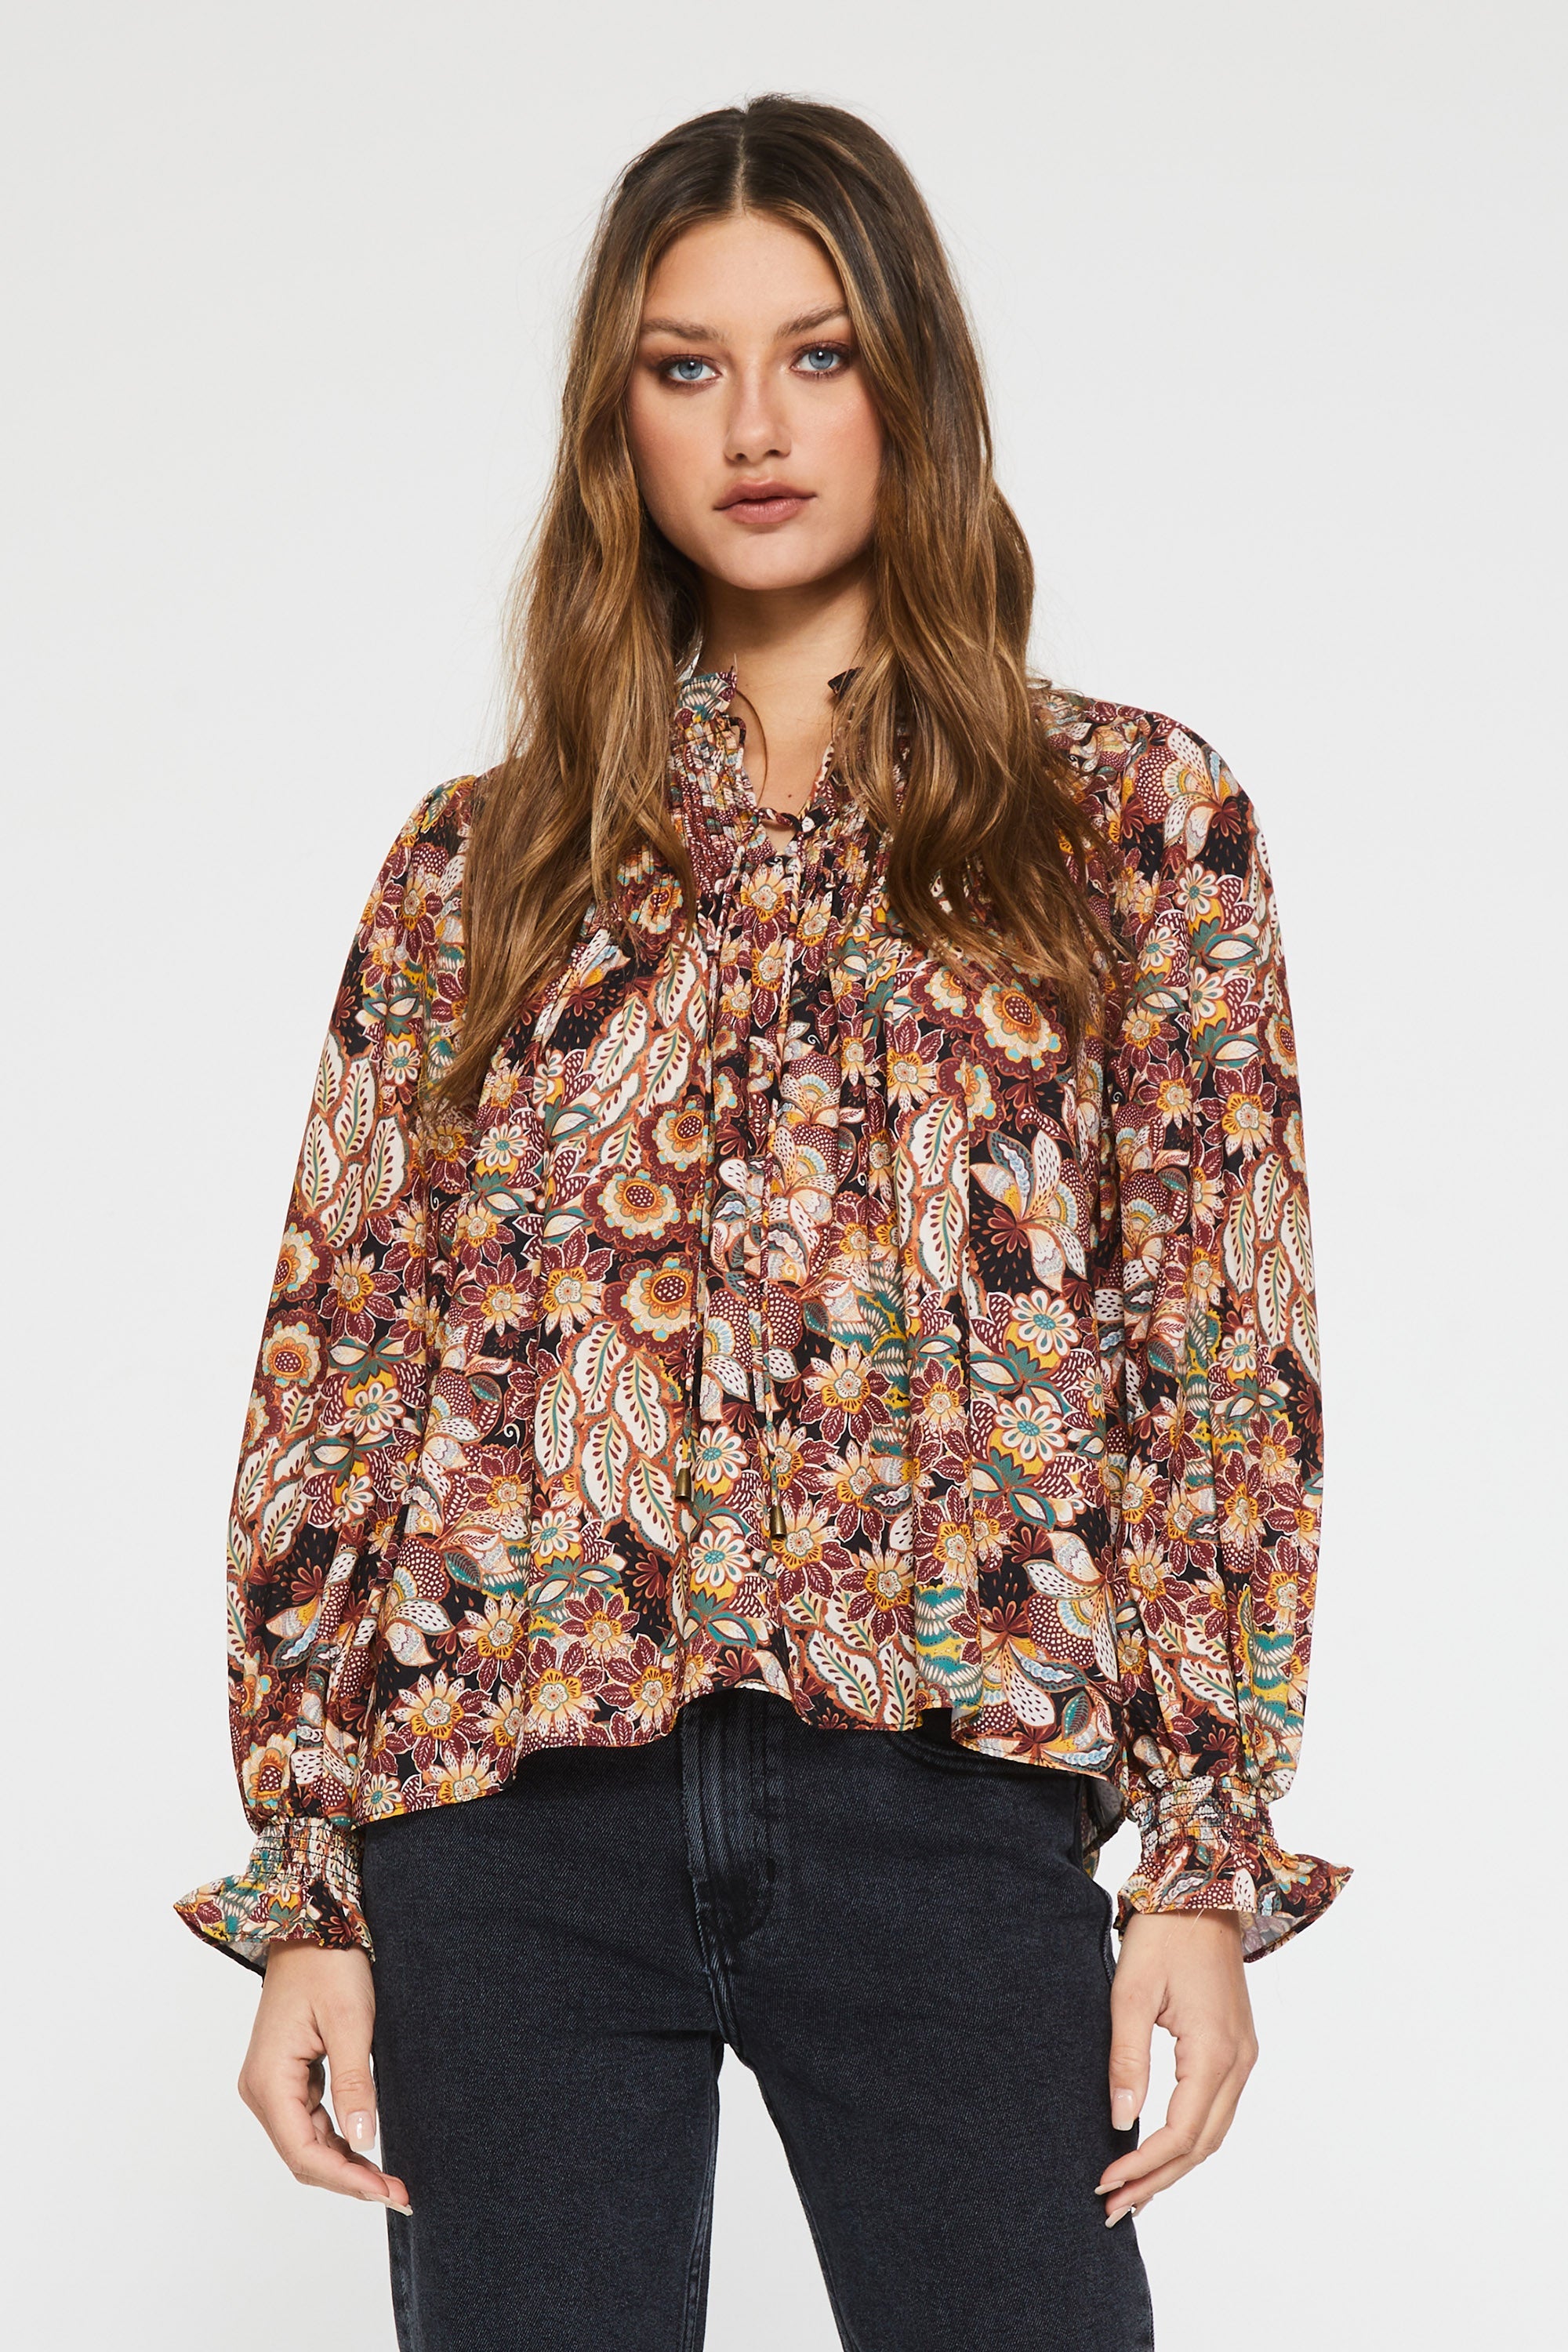 kassidy-front-pleats-top-bayu-floral-front-image-another-love-clothing